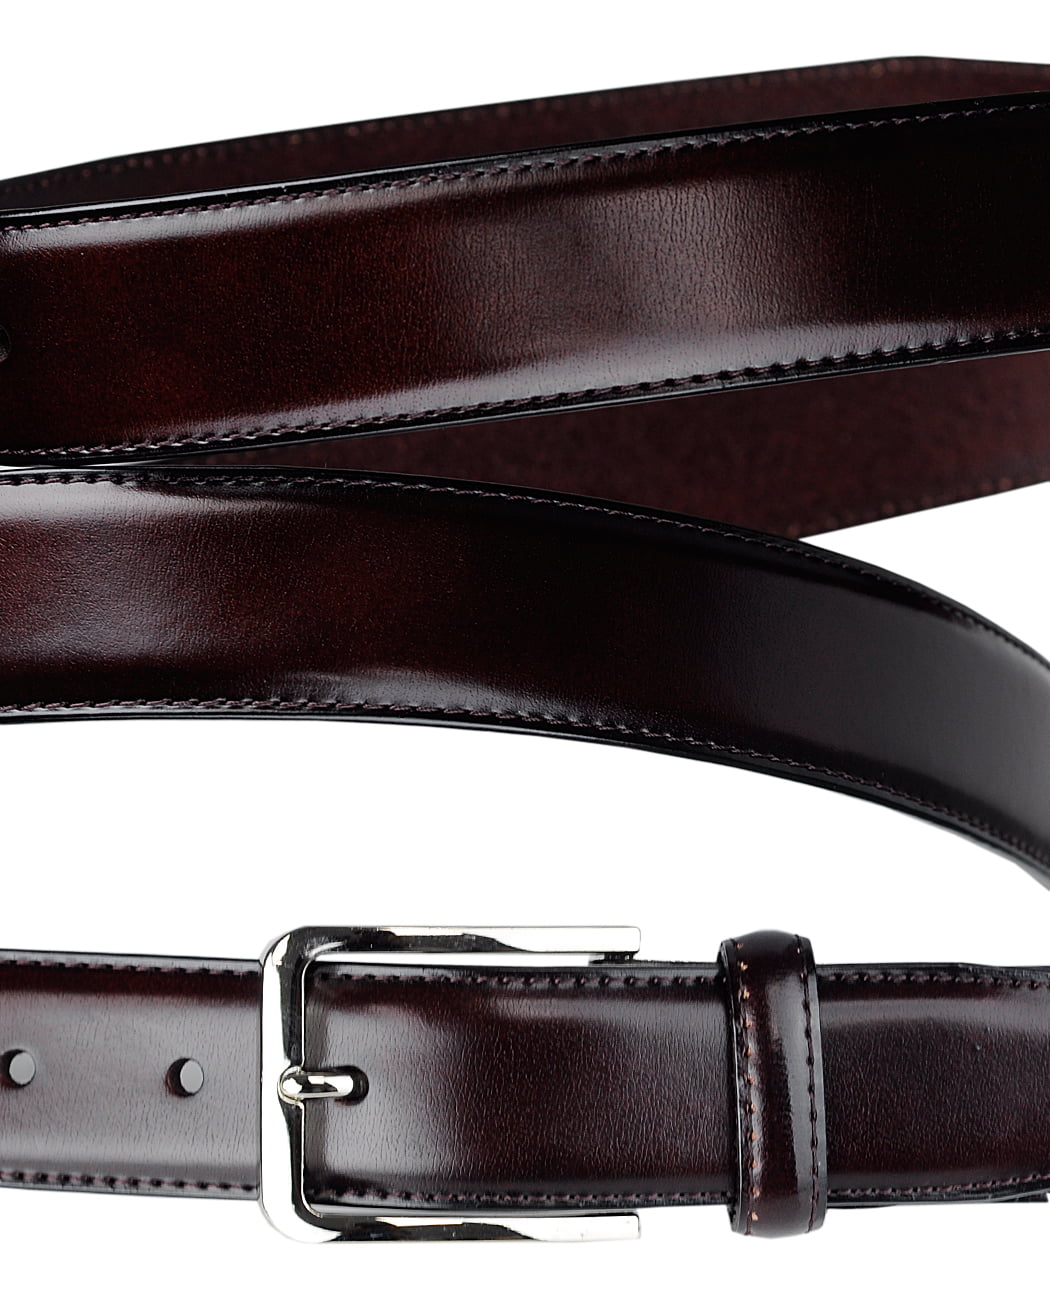 Eurosport Mens Bonded Leather Cut-To-Fit Classic Belt with Metal Square Buckle